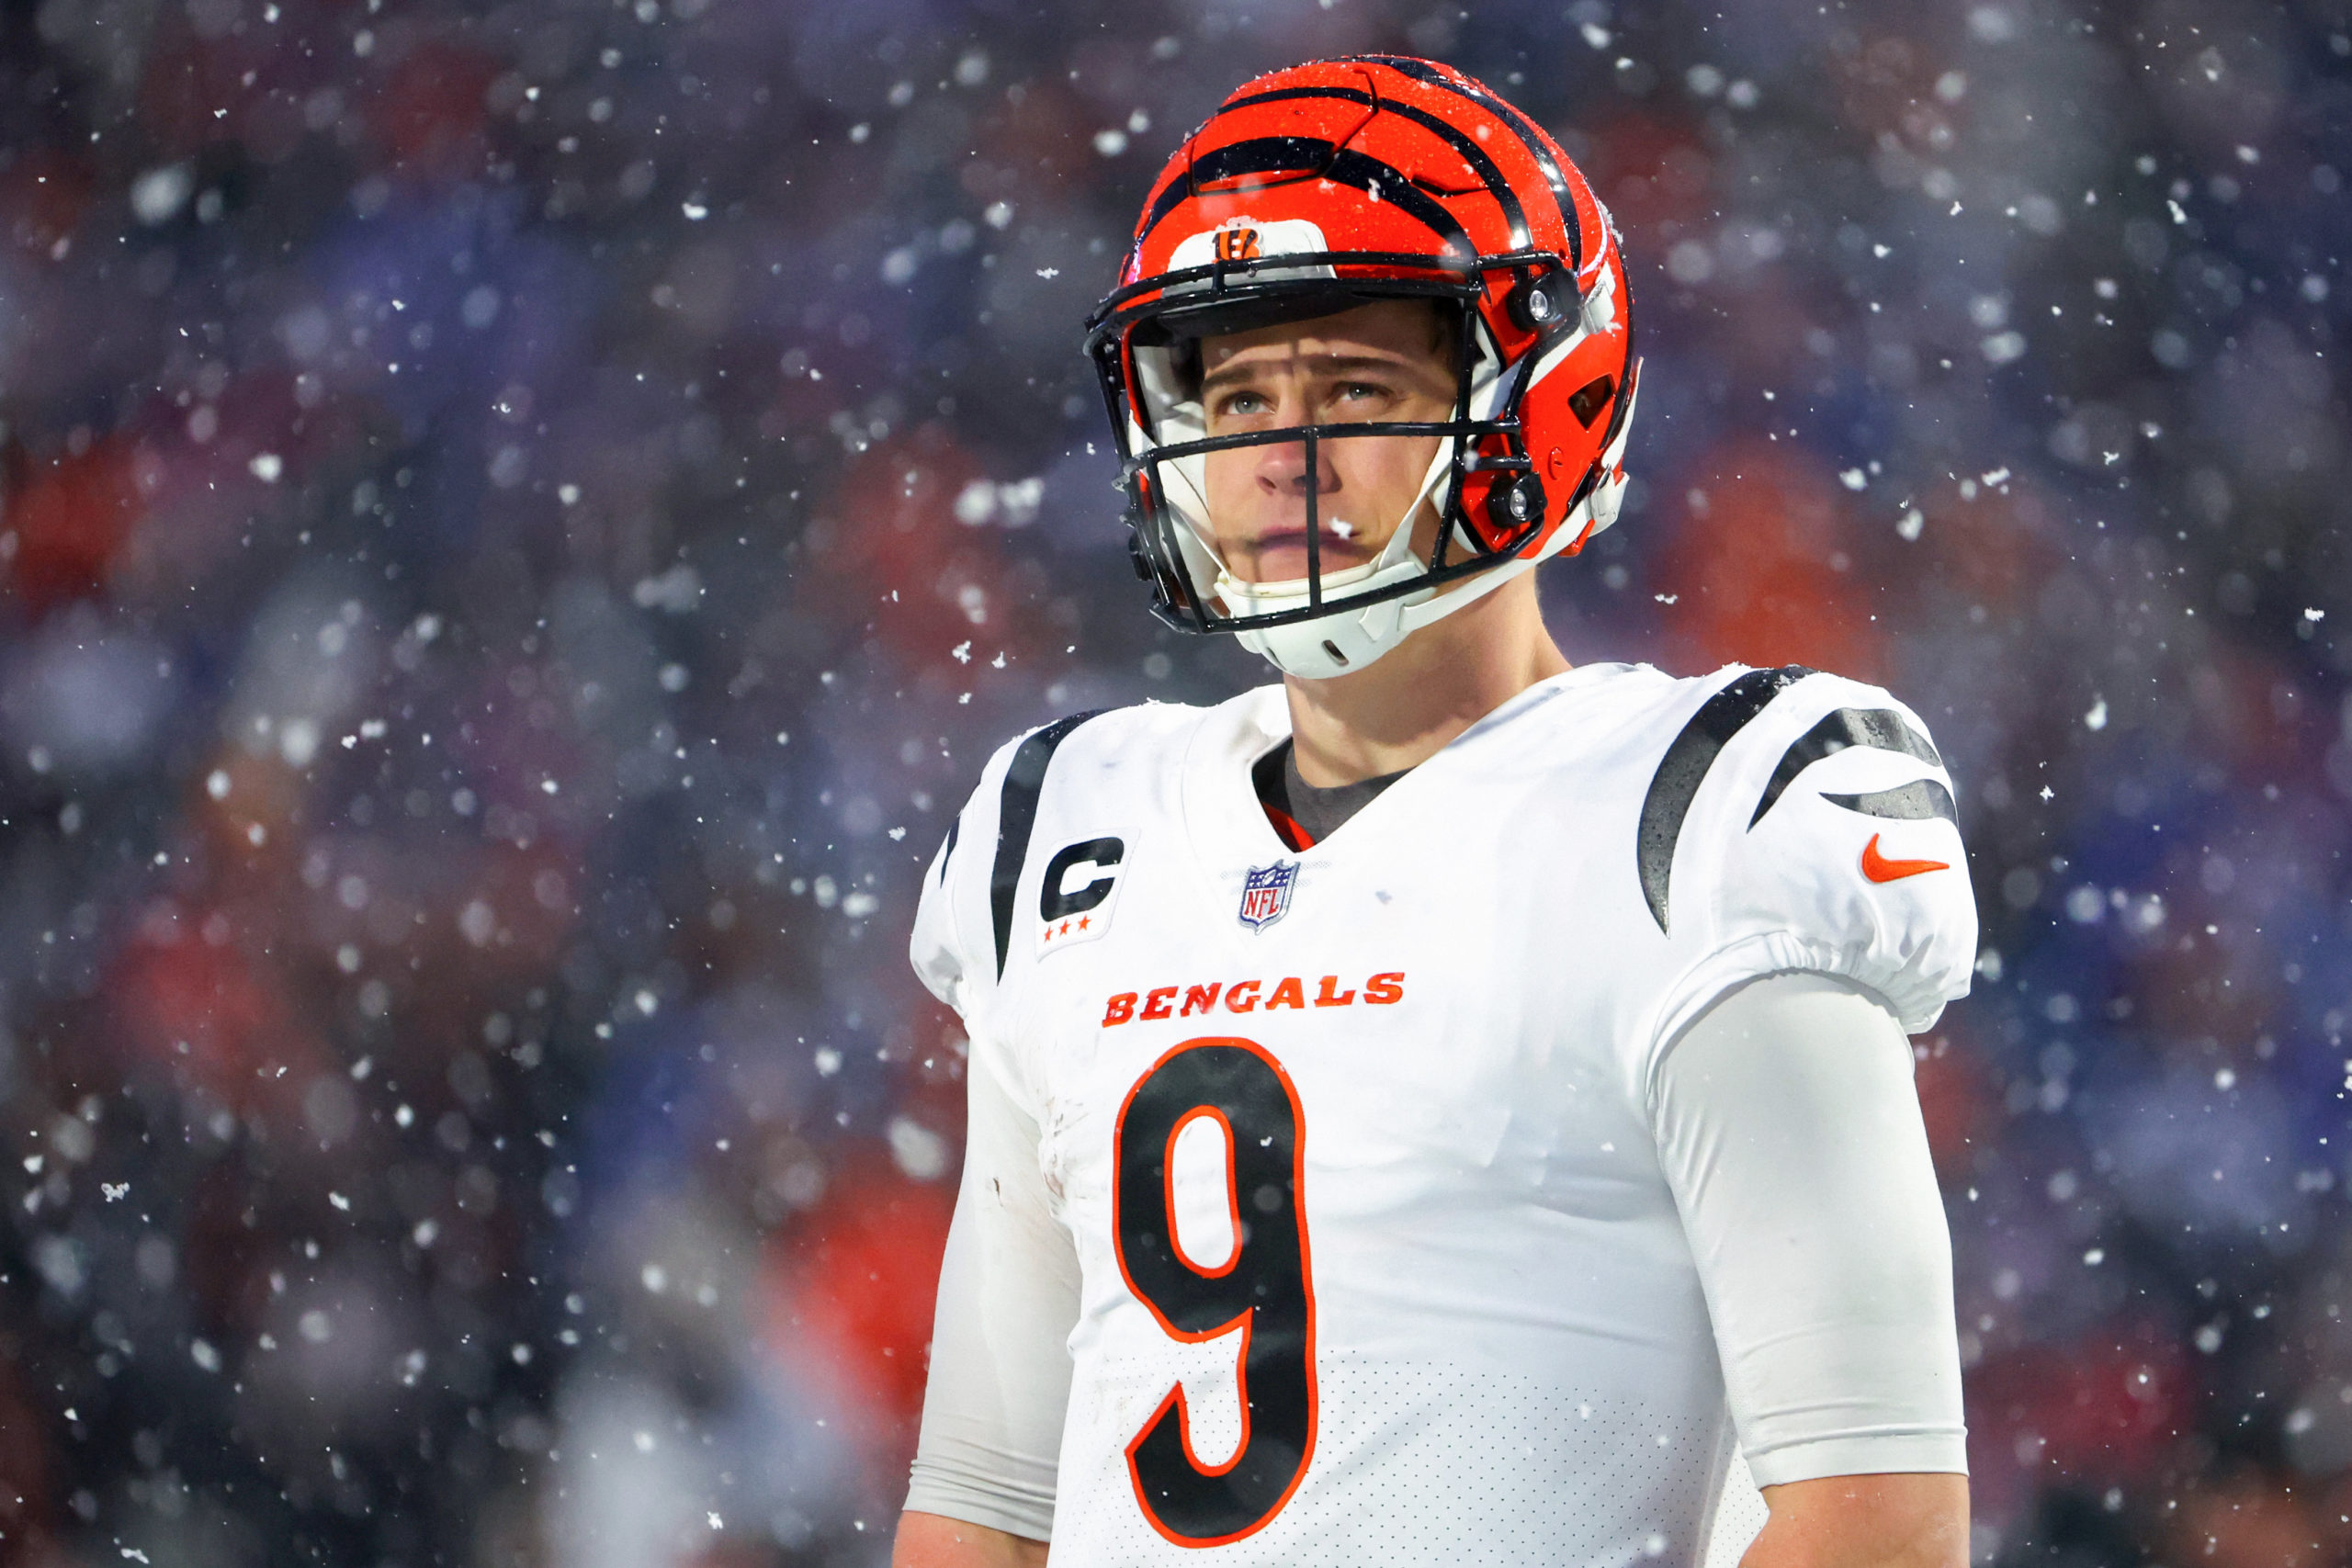 ORCHARD PARK, NEW YORK - JANUARY 22: Joe Burrow #9 of the Cincinnati Bengals looks on against the Buffalo Bills during the third quarter in the AFC Divisional Playoff game at Highmark Stadium on January 22, 2023 in Orchard Park, New York. (Photo by Timothy T Ludwig/Getty Images)